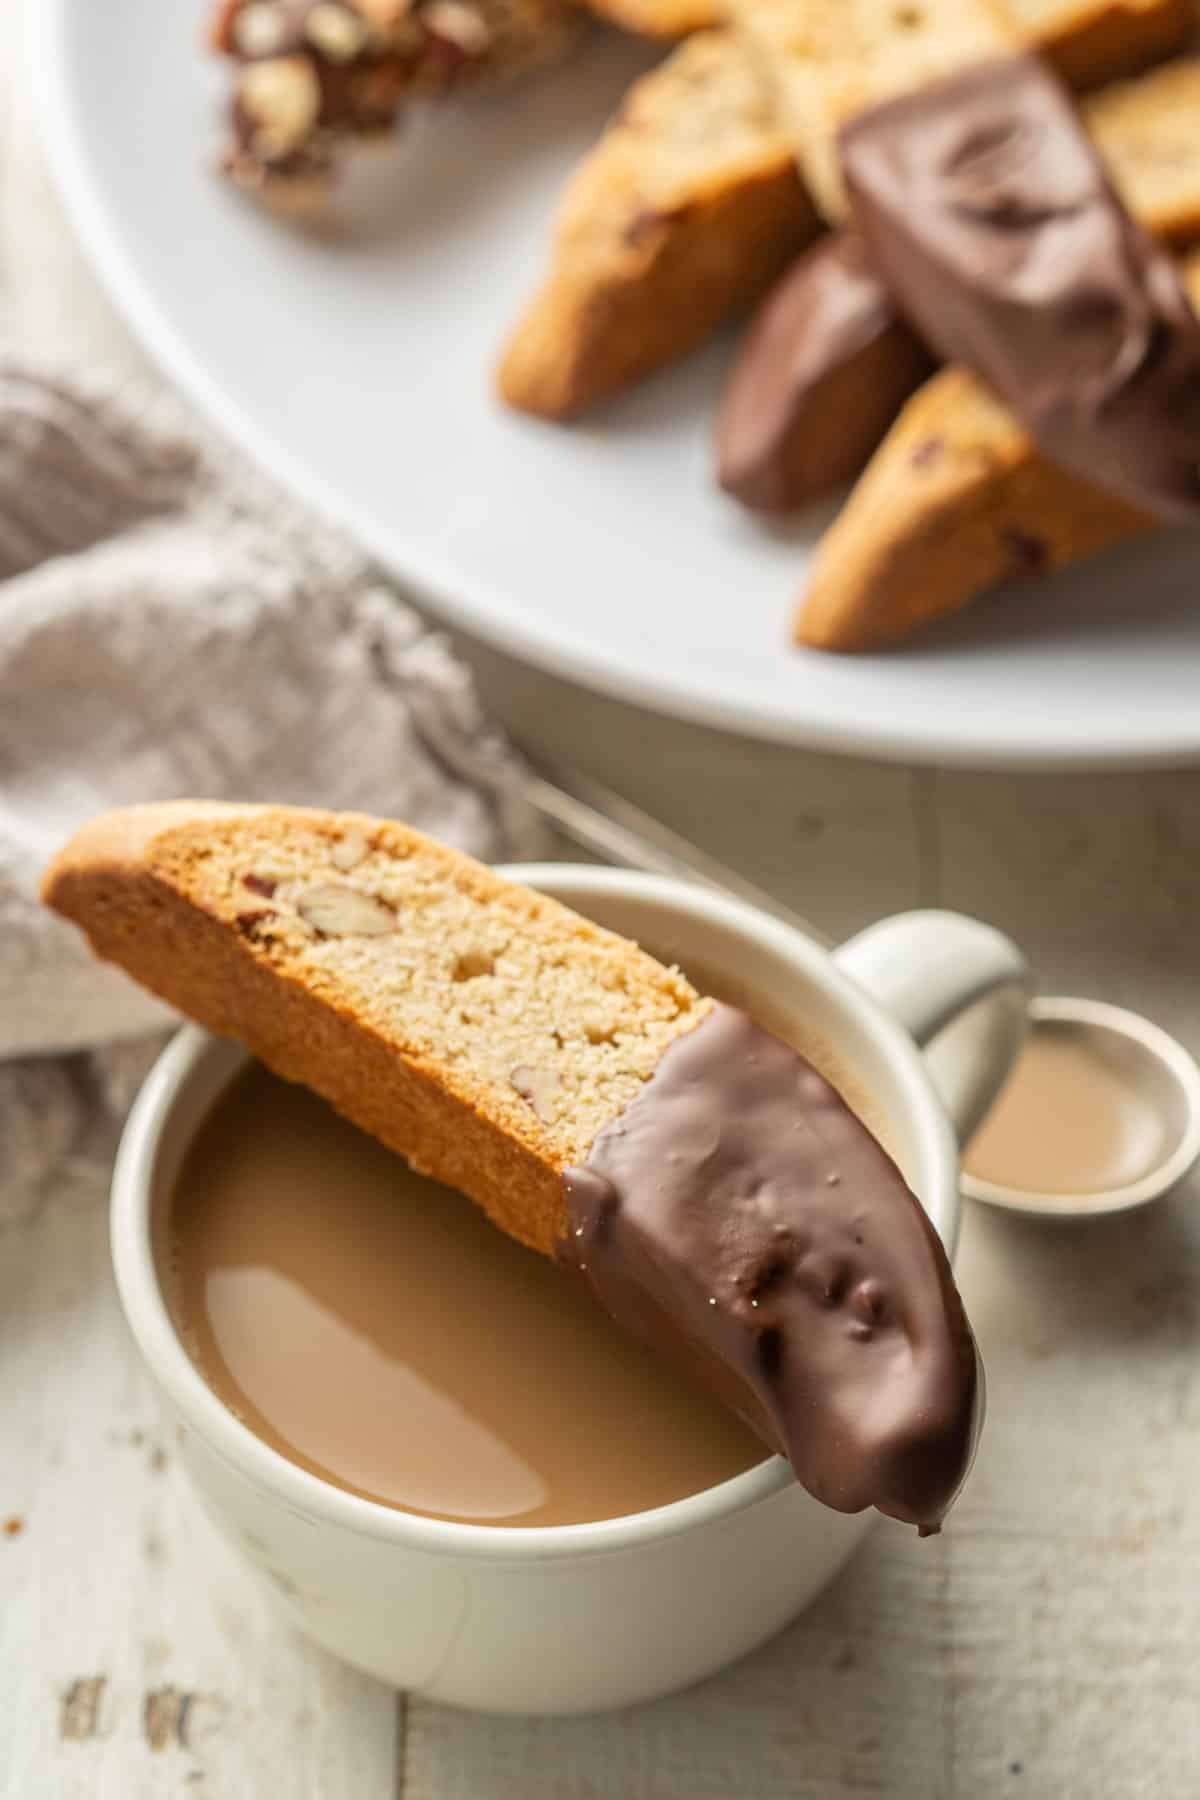 Chocolate dipped Vegan Biscotti sitting on top of a coffee cup.